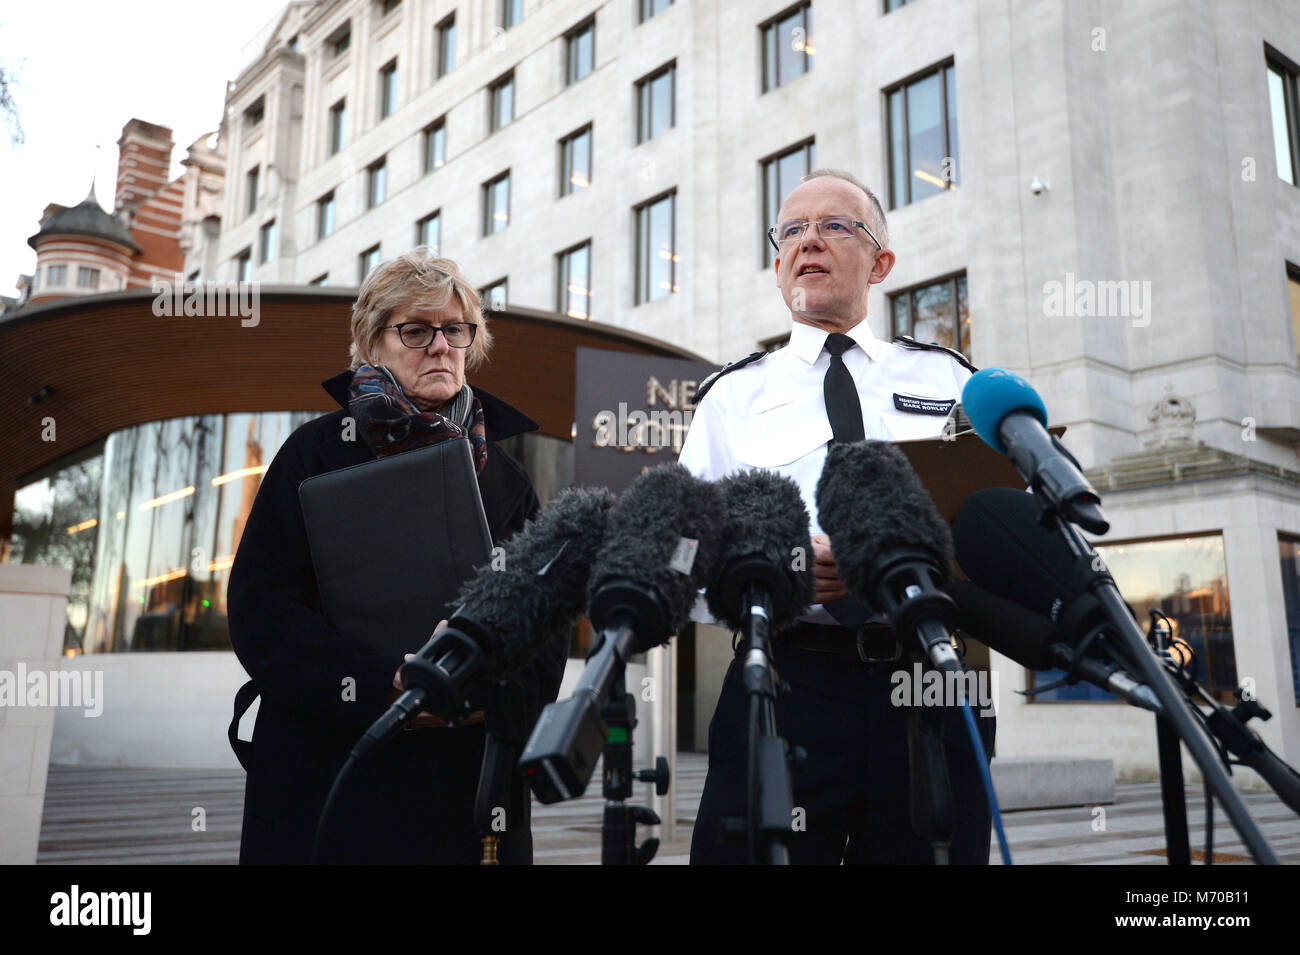 Head of counter-terrorism policing Assistant Commissioner Mark Rowley and England's chief medical officer Dame Sally Davies outside New Scotland Yard, central London giving an update on the ongoing incident after former Russian double agent Sergei Skripal and his daughter, Yulia, were found critically ill by exposure to an unknown substance in Salisbury. Stock Photo